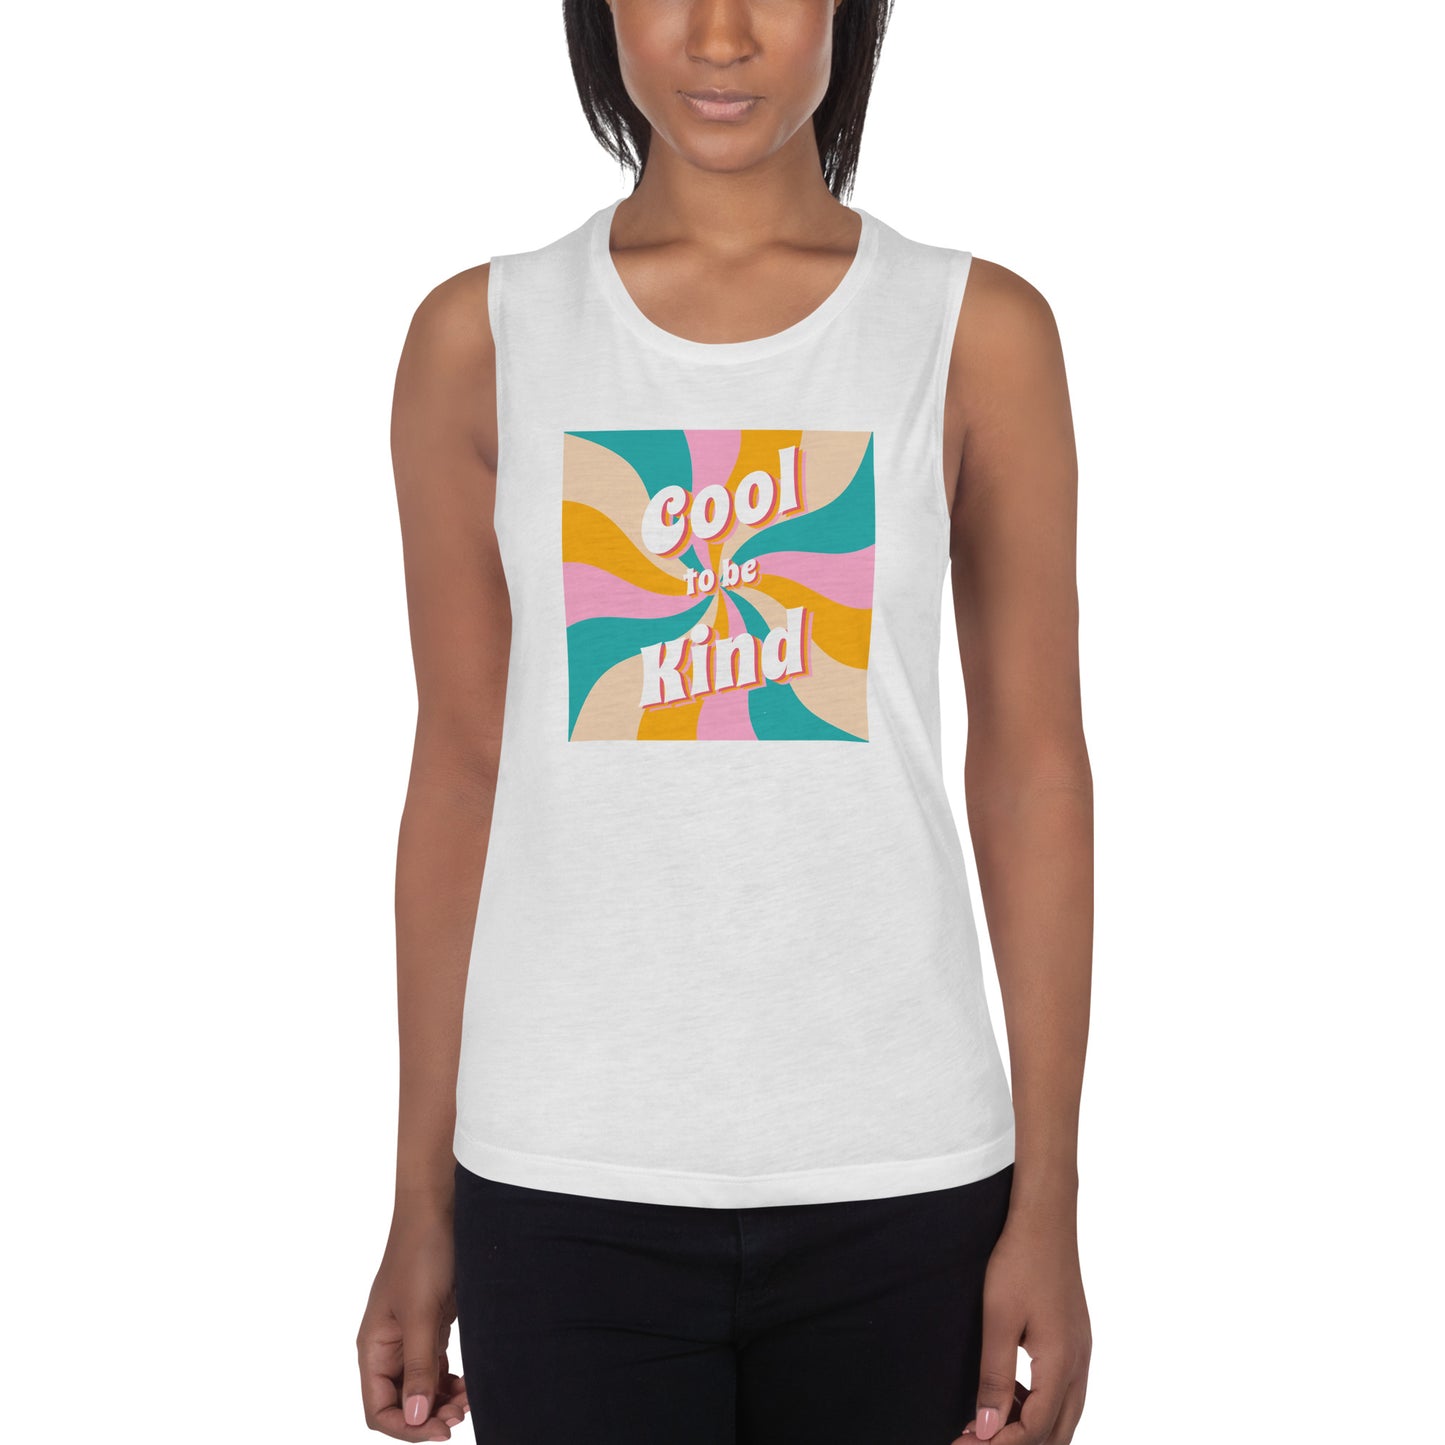 Cool to be Kind Retro Ladies’ Muscle Tank